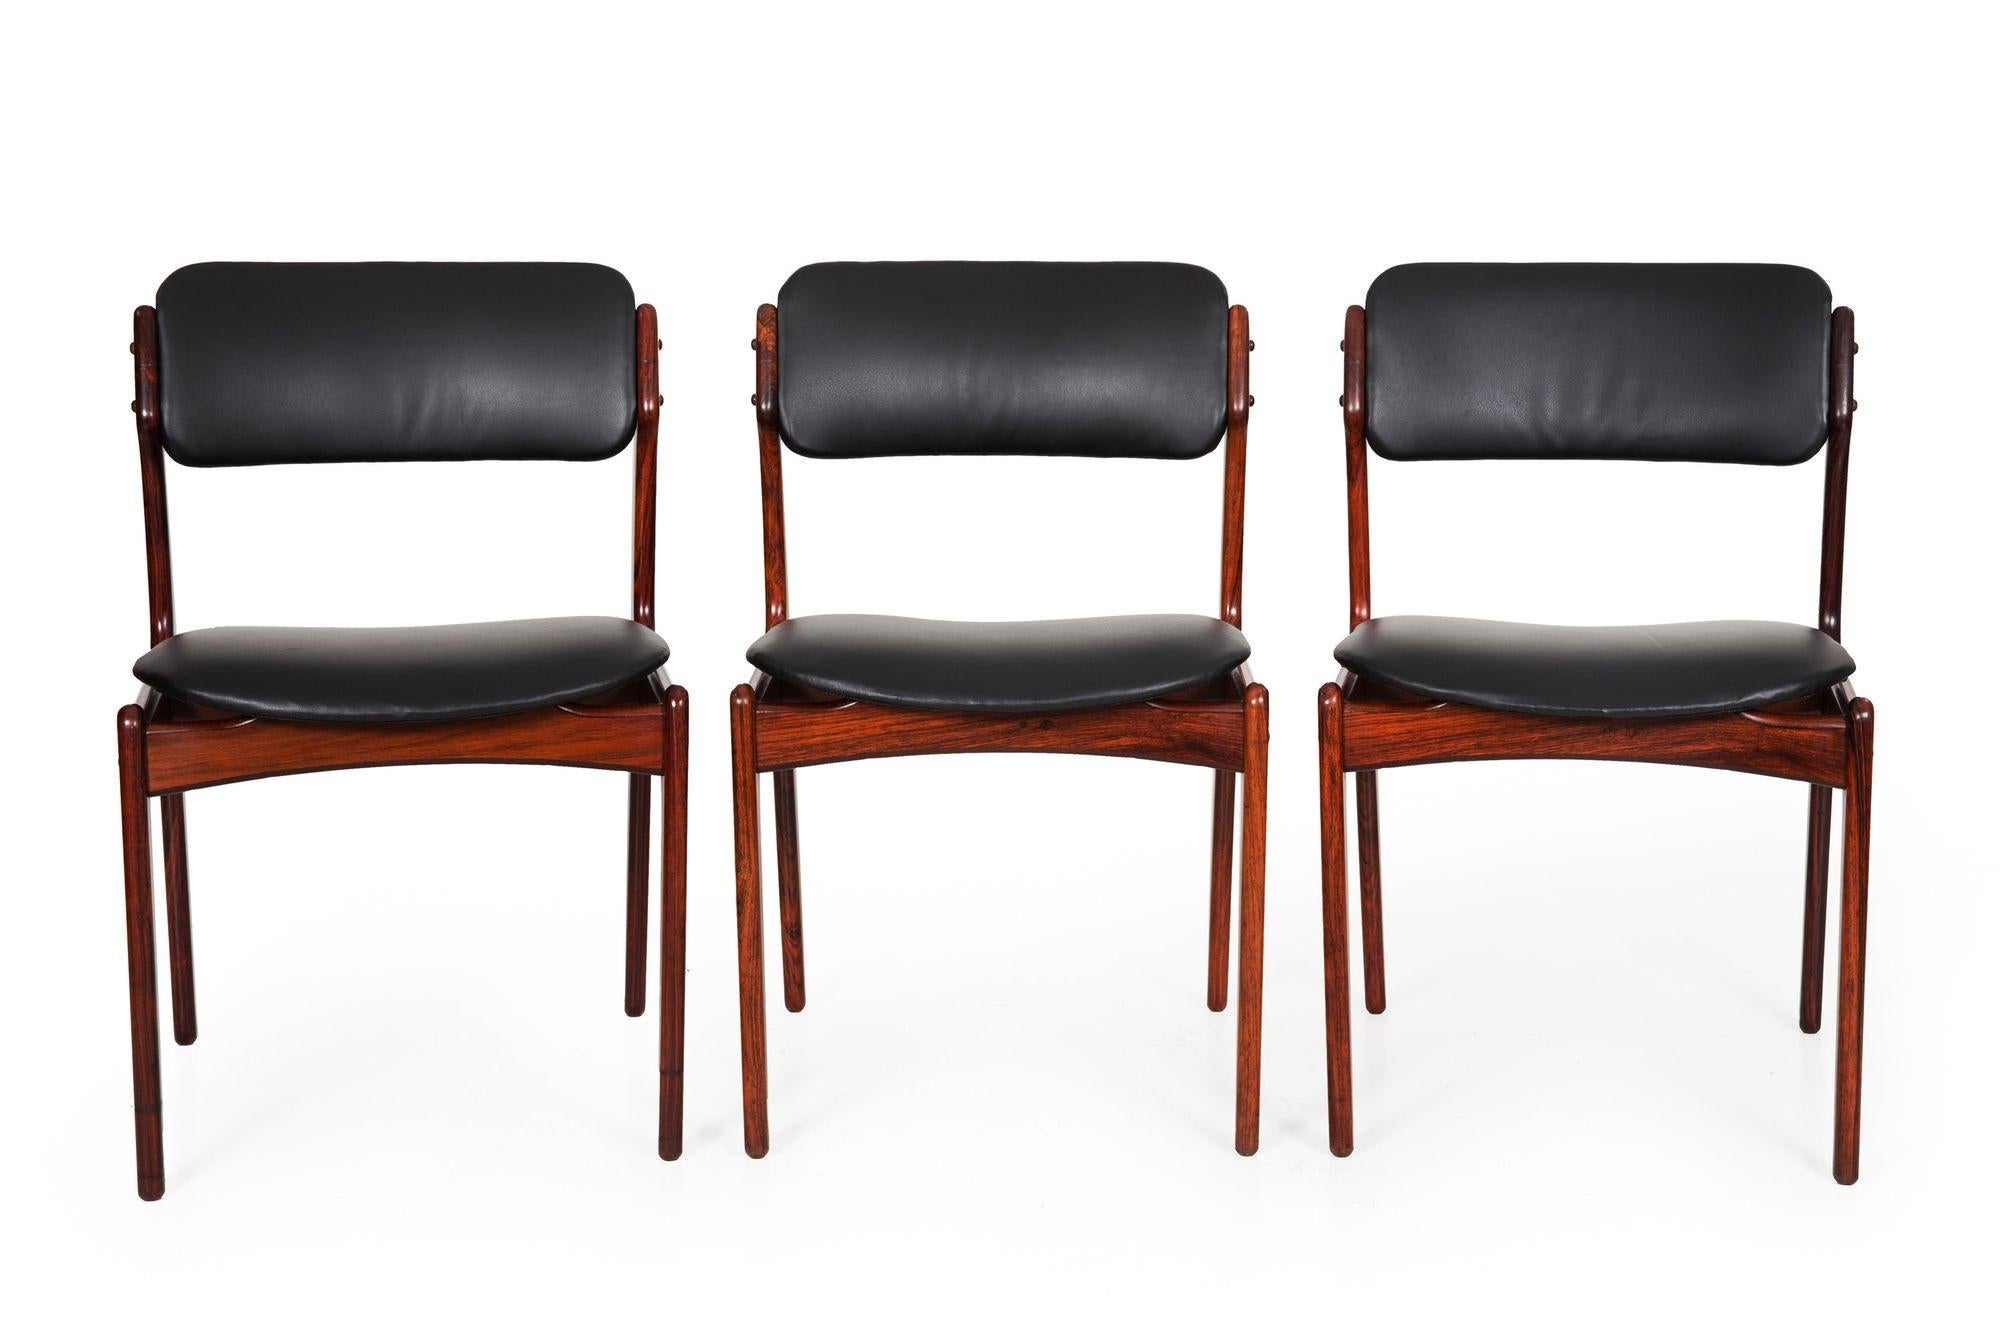 Set of 6 Danish Modern Rosewood Black Leather Dining Chairs by Erik Buch 1